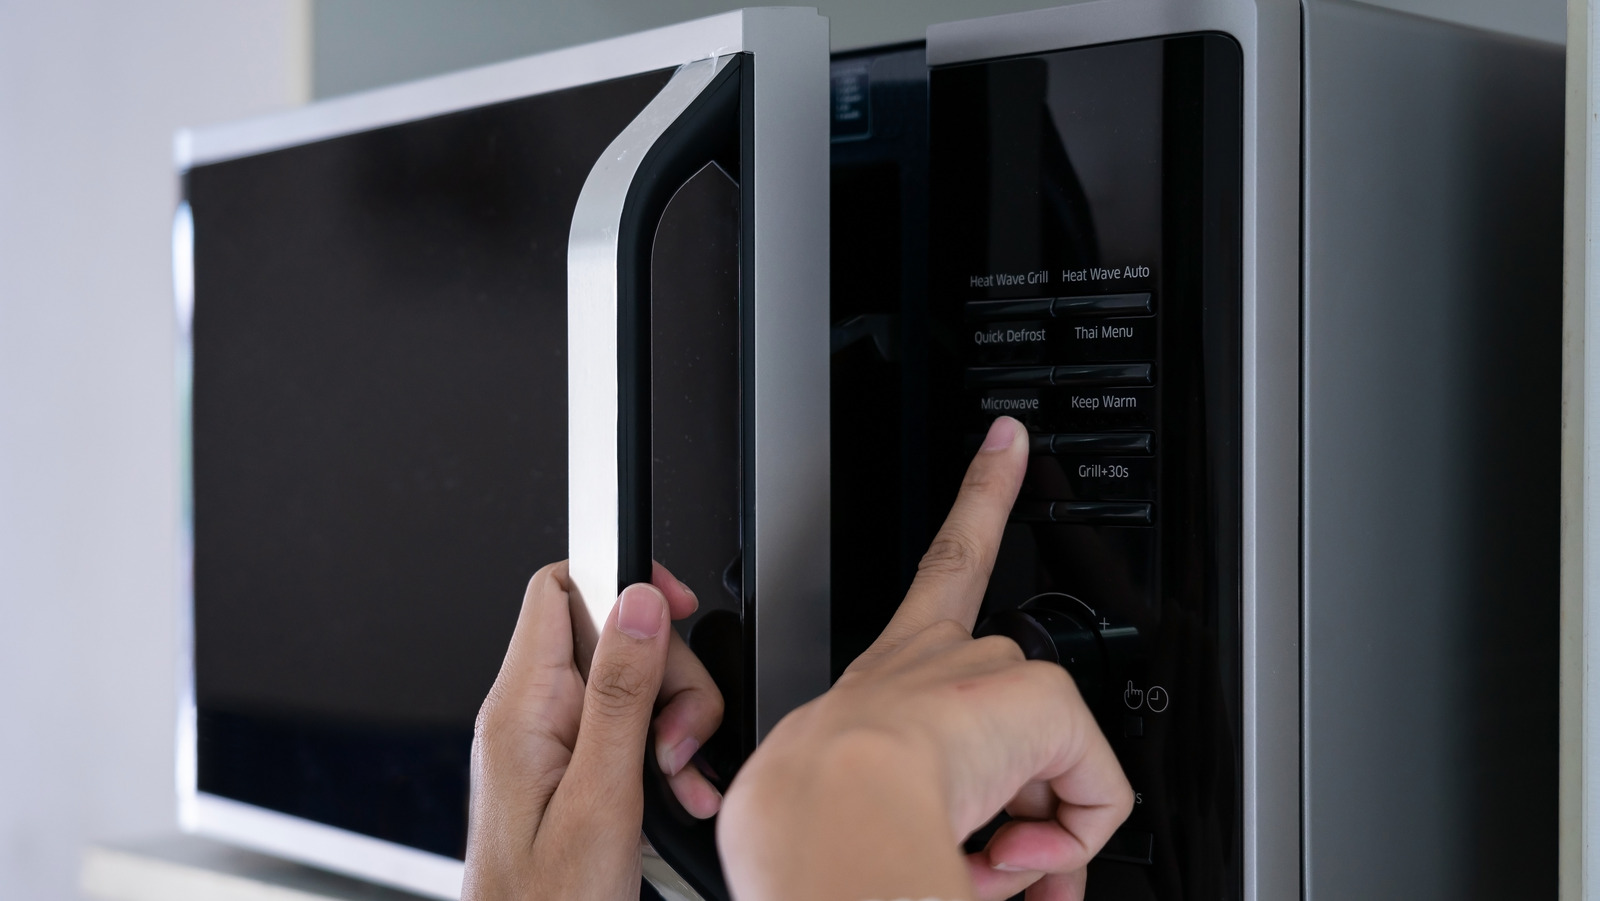 8 mistakes people make when using a microwave